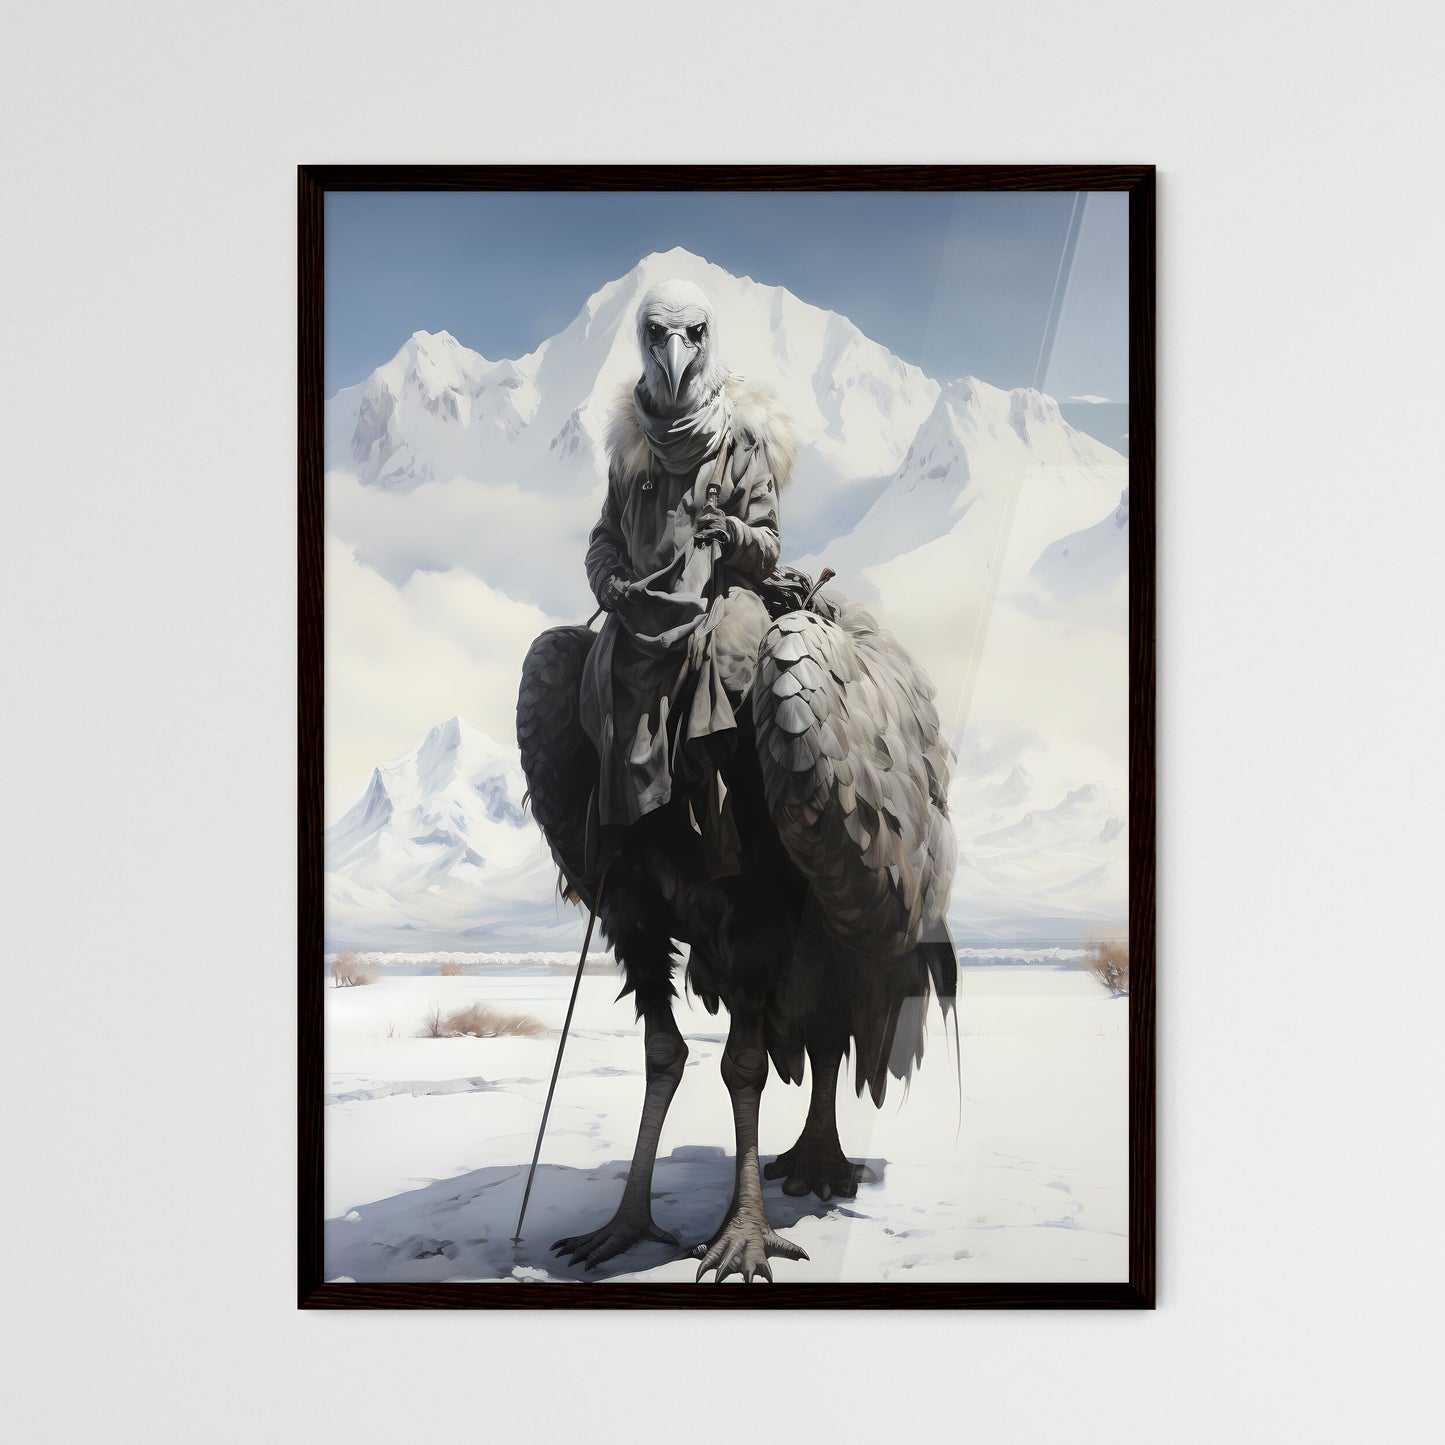 A Poster of A rider on a large ostrich - A Person Riding A Bird With A Large Bird Head Default Title